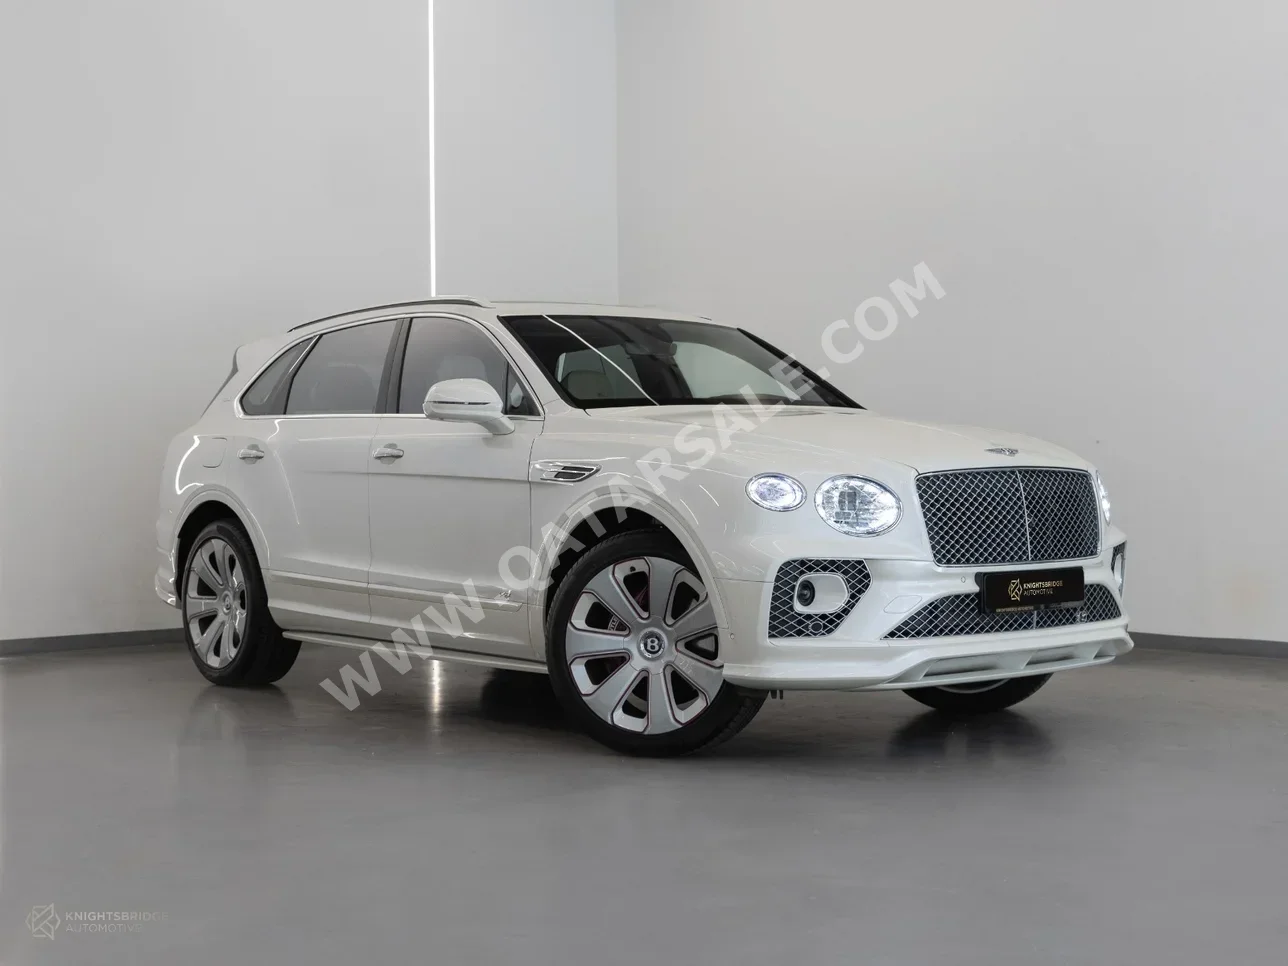 Bentley  Bentayga  Mulliner  2022  Automatic  700 Km  8 Cylinder  Four Wheel Drive (4WD)  SUV  White  With Warranty